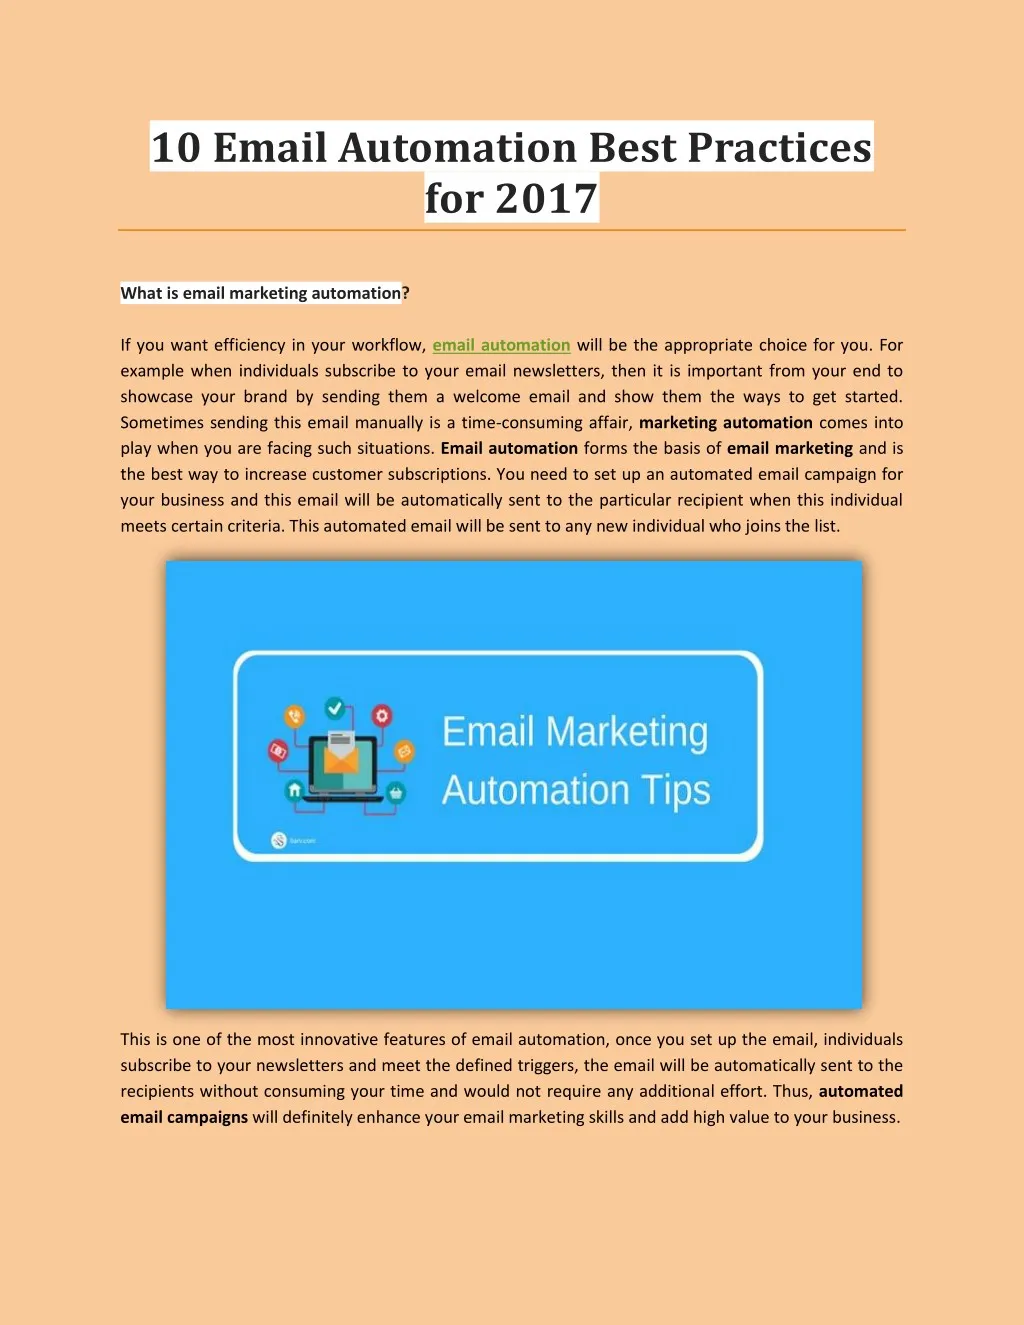 10 email automation best practices for 2017